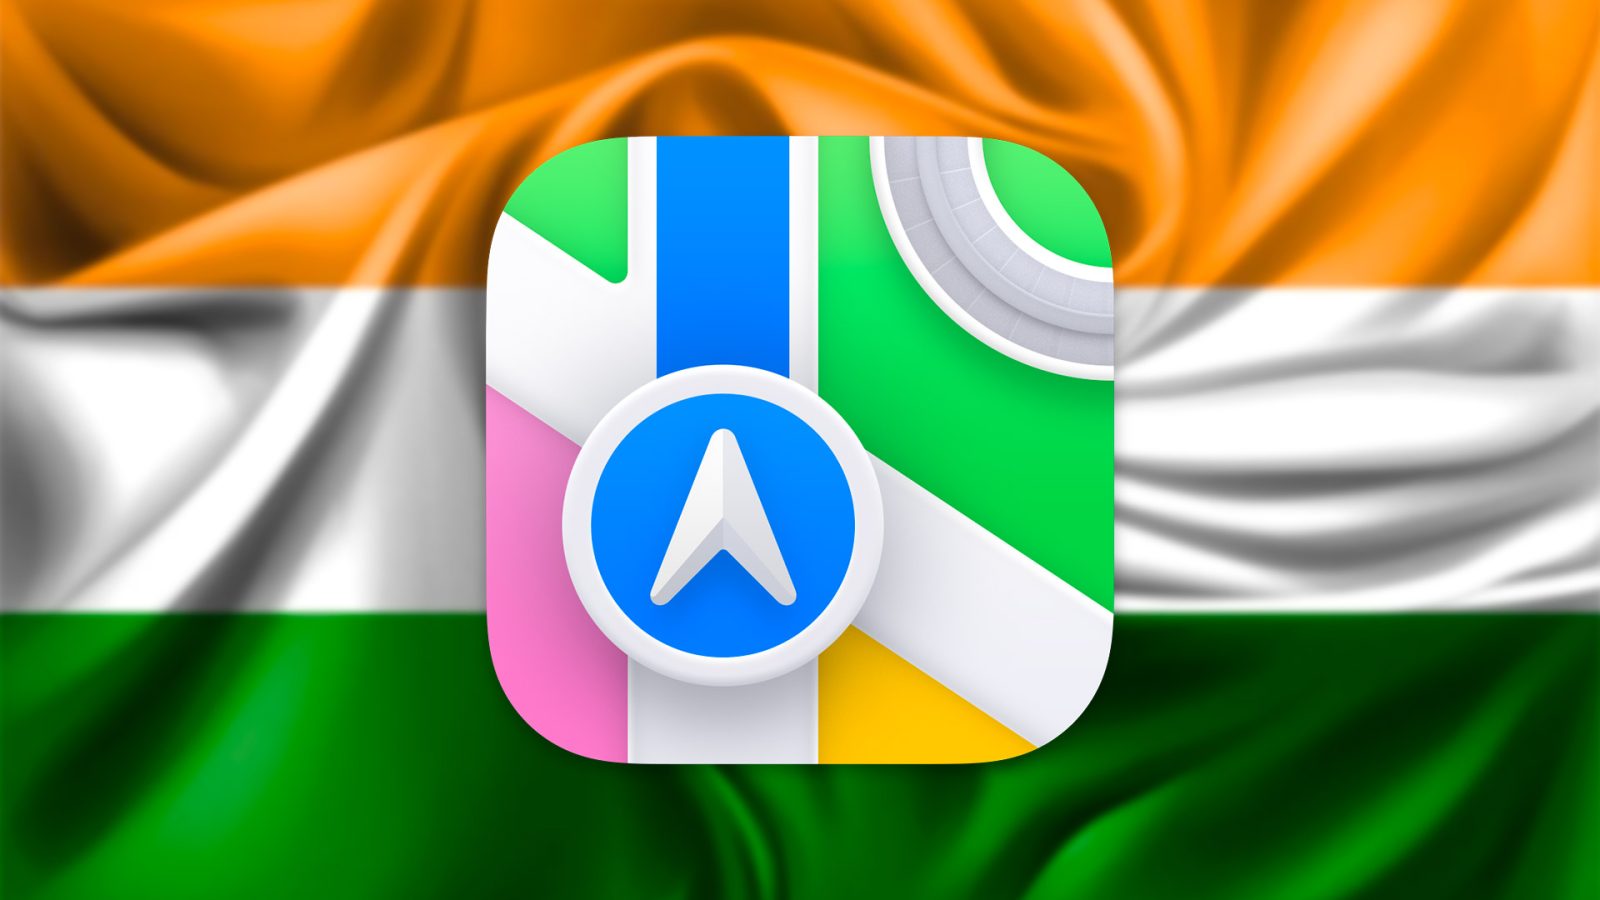 Apple and other companies concerned as India tries to push its own GPS system